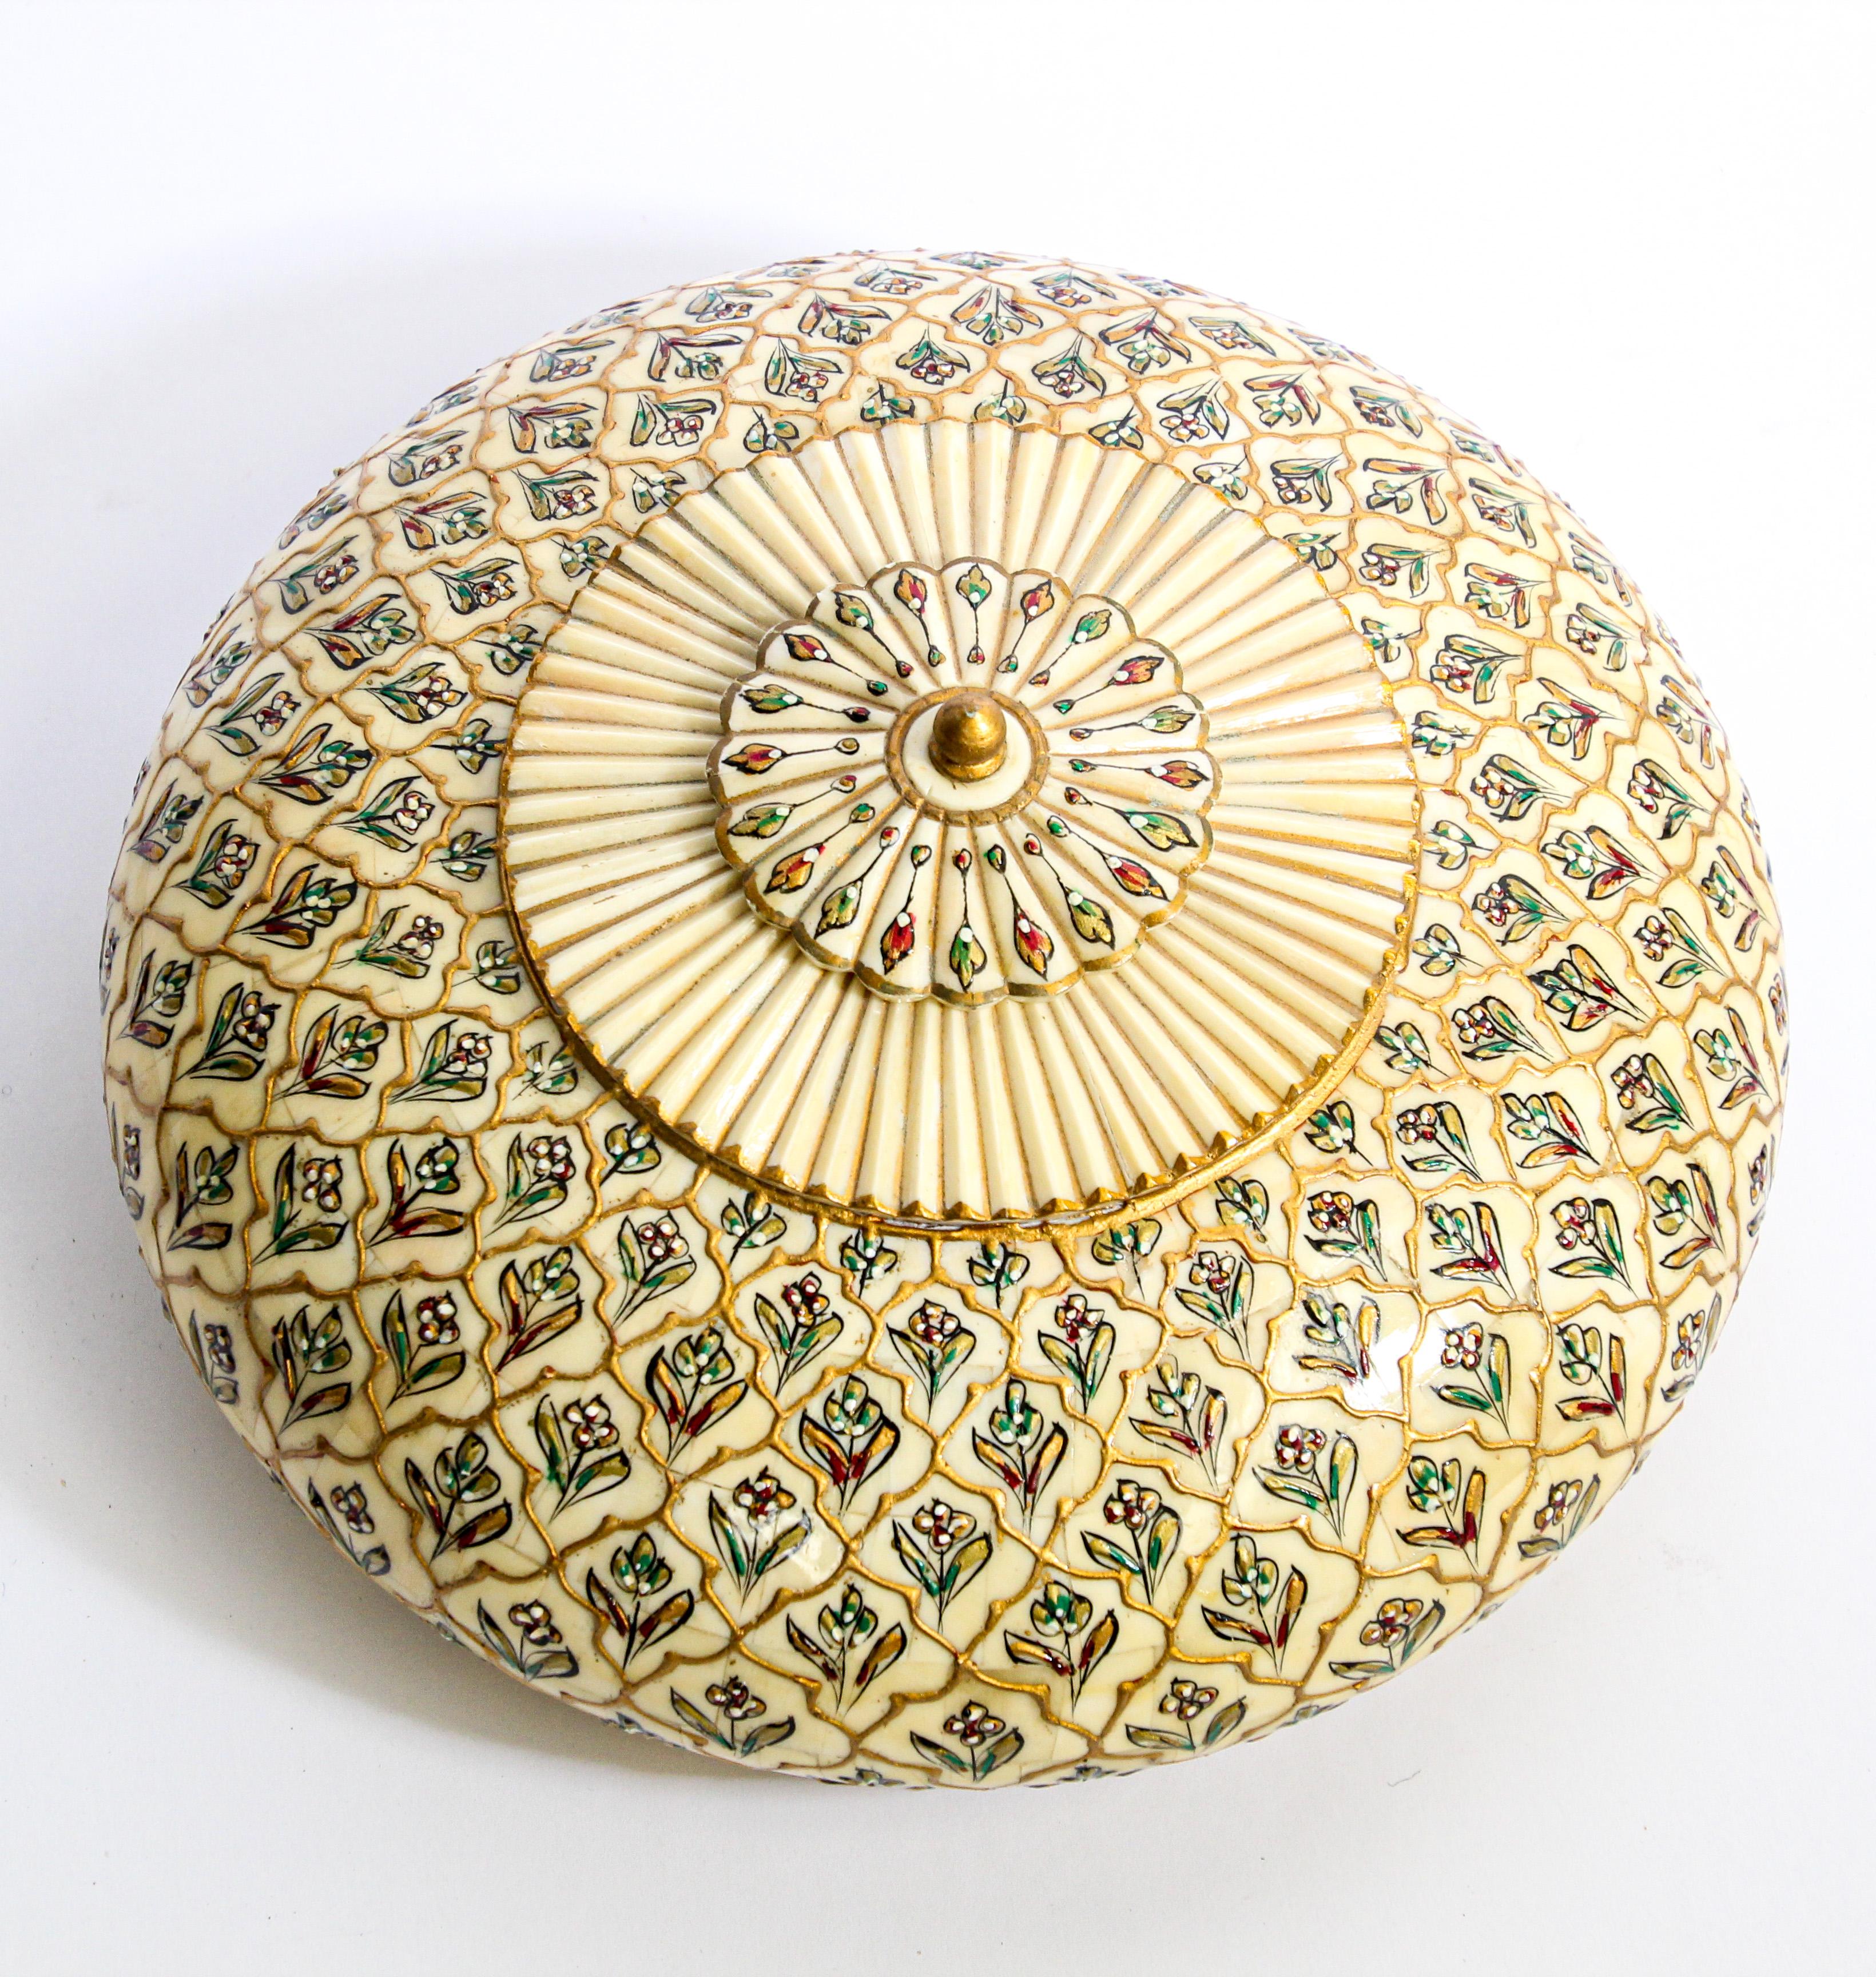 Collectible Opium Container Mughal Art Round Lidded Box For Sale 1